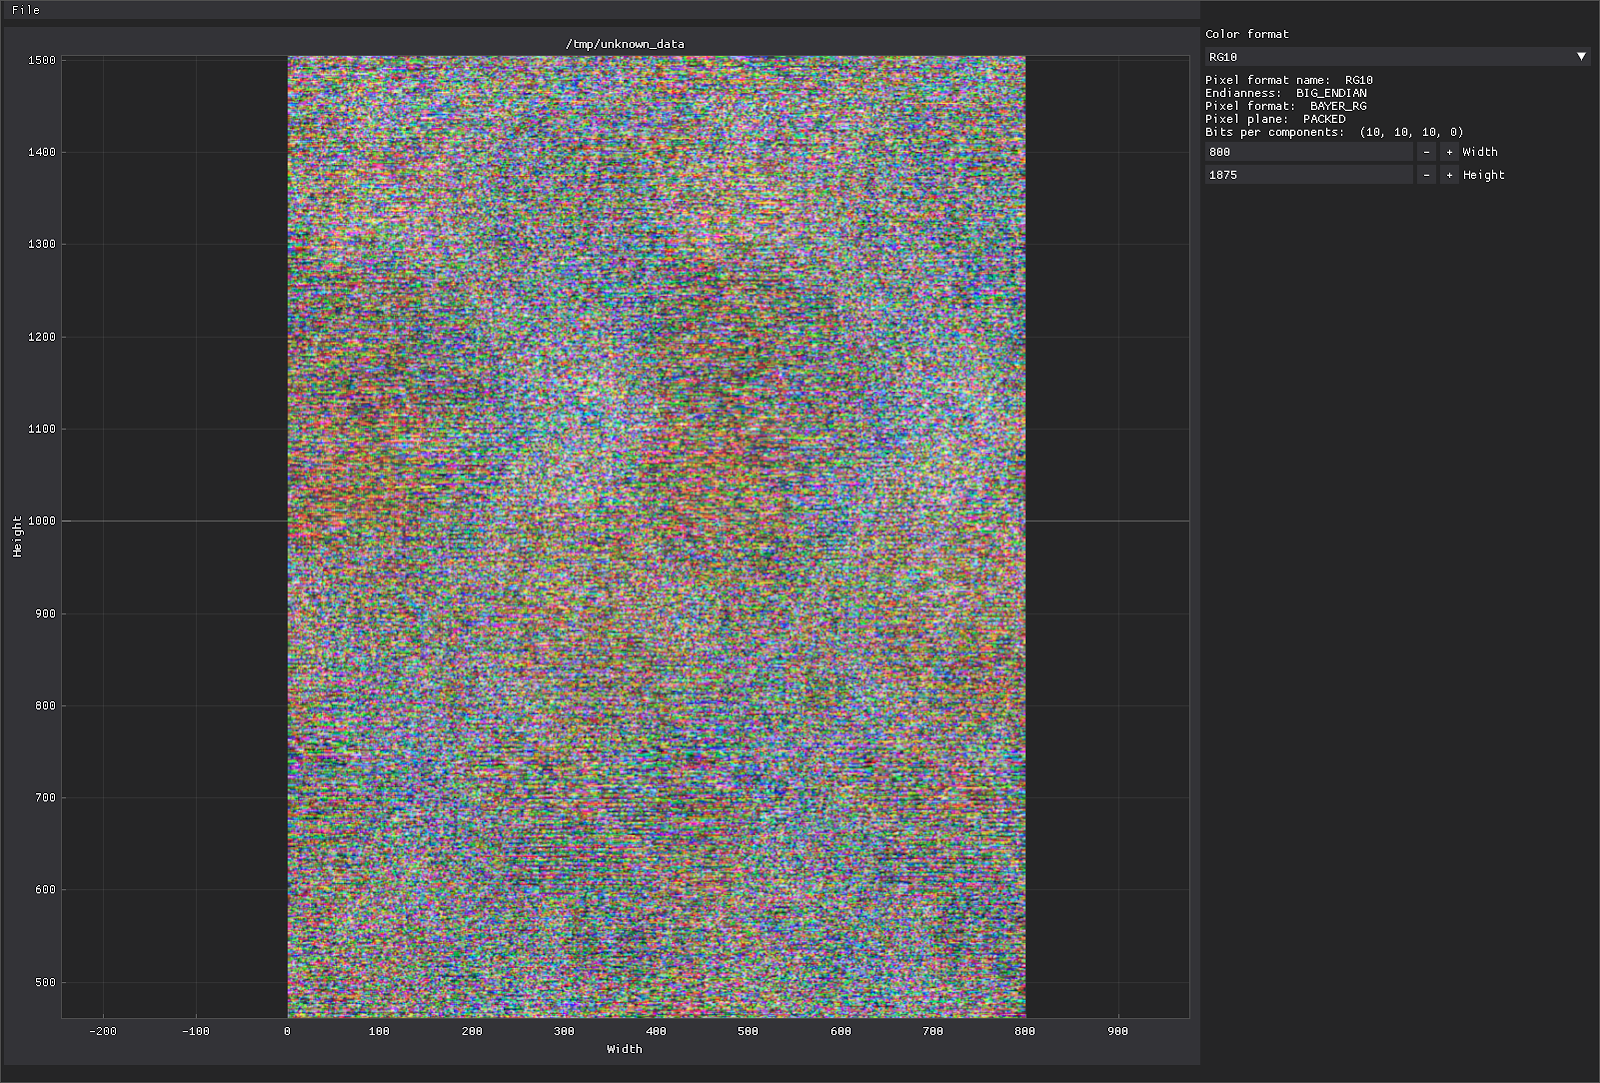 Visualizing binary data to images with Ravwier